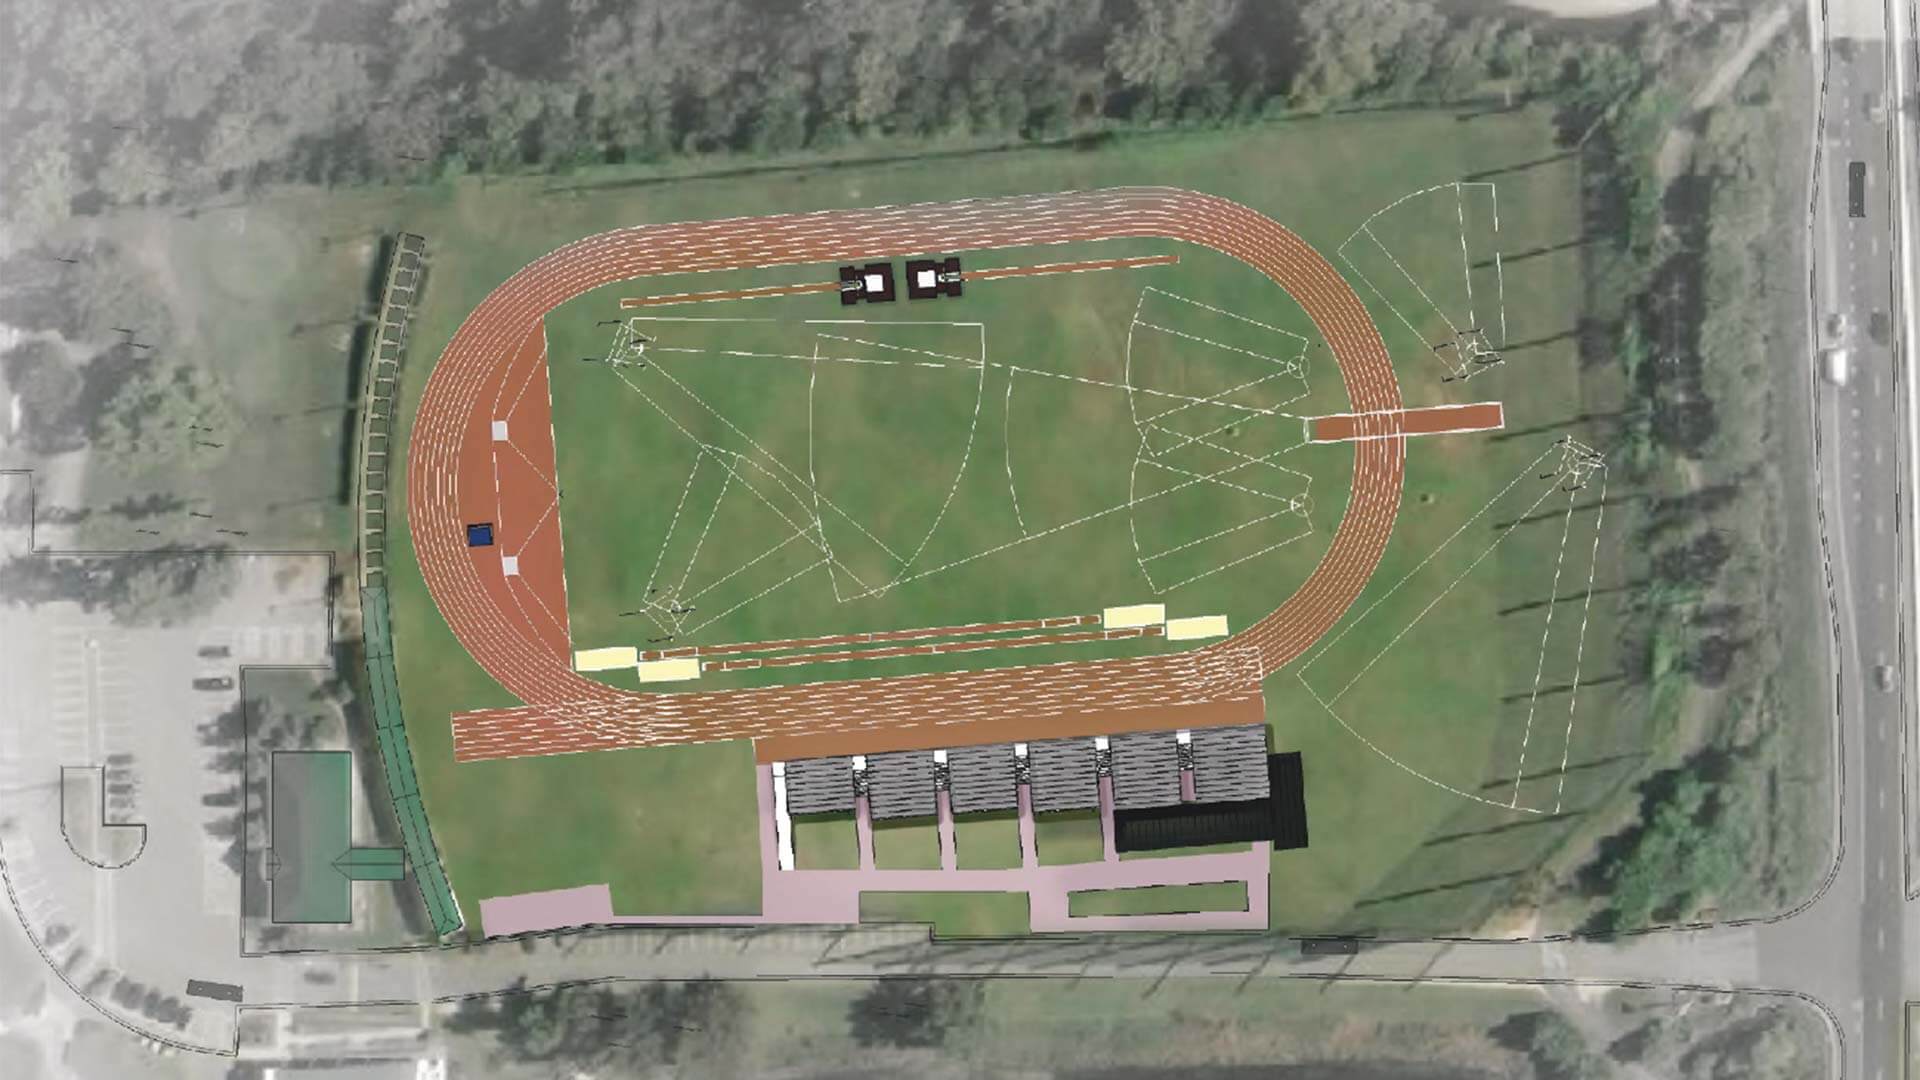 Rendering of the Track and Field Stadium